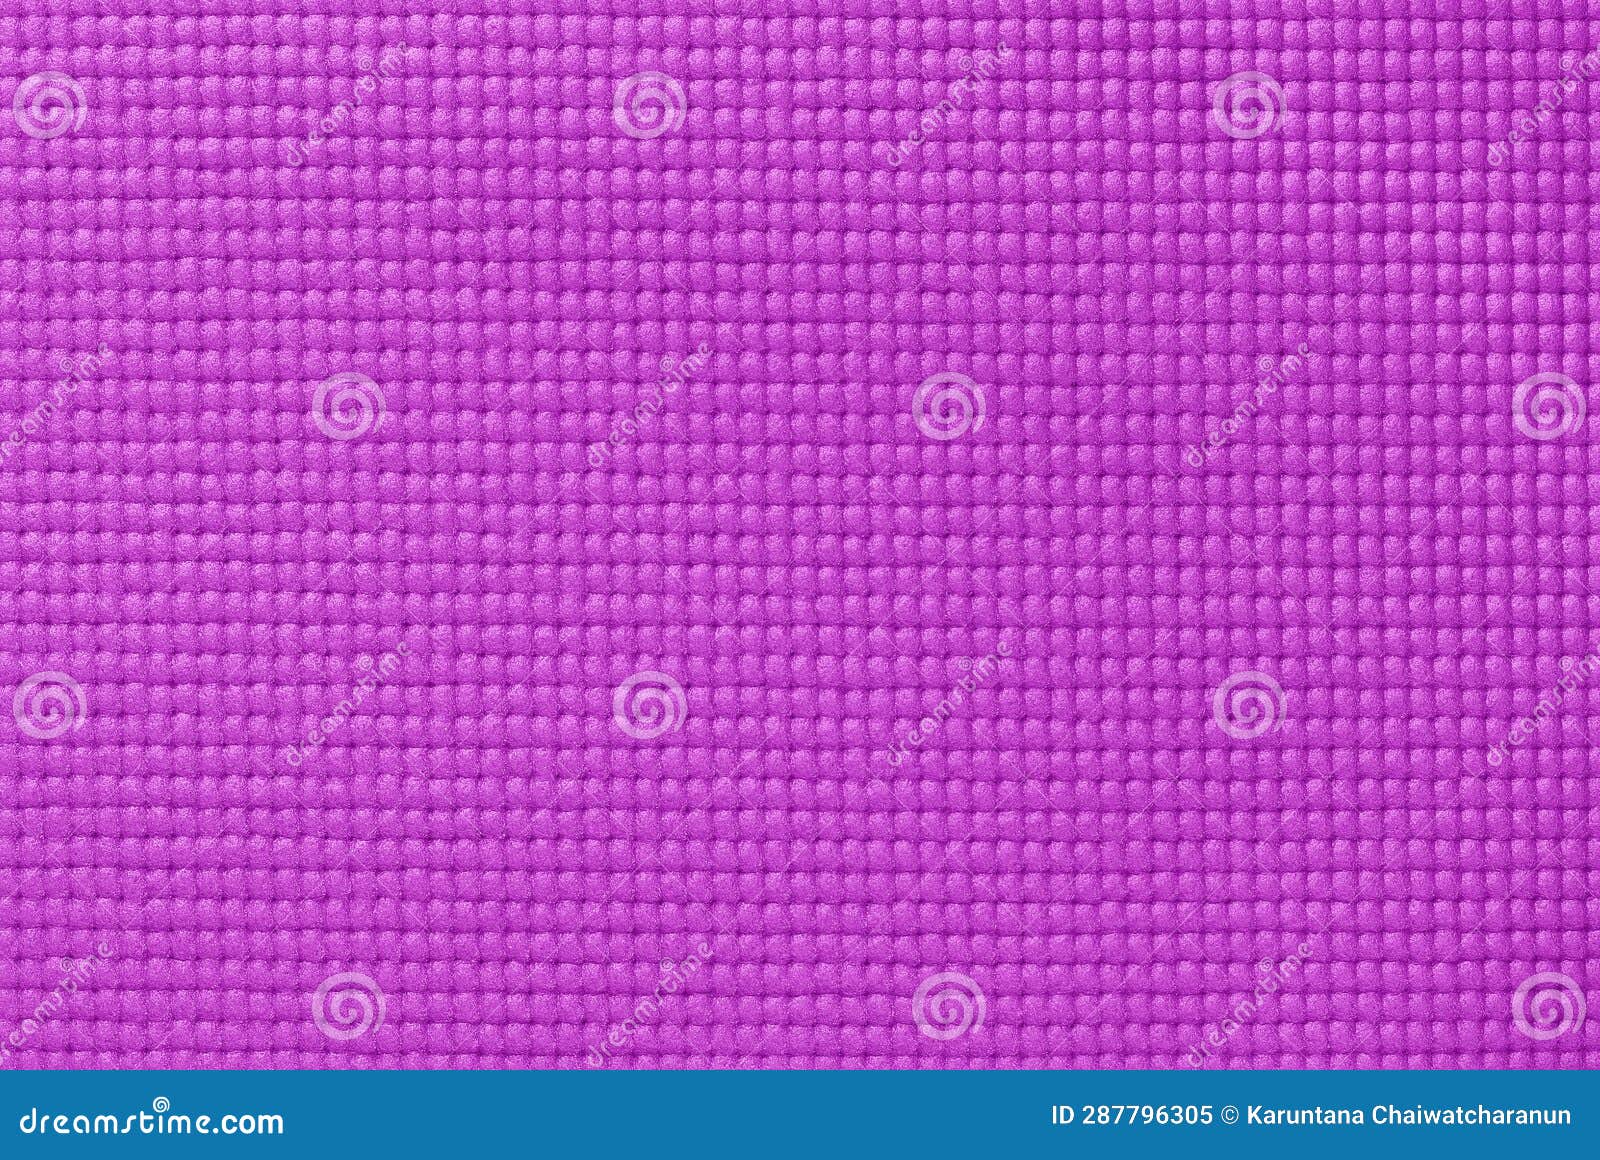 Purple Yoga Mat Texture, Pattern of Rubber for Background Stock Image ...